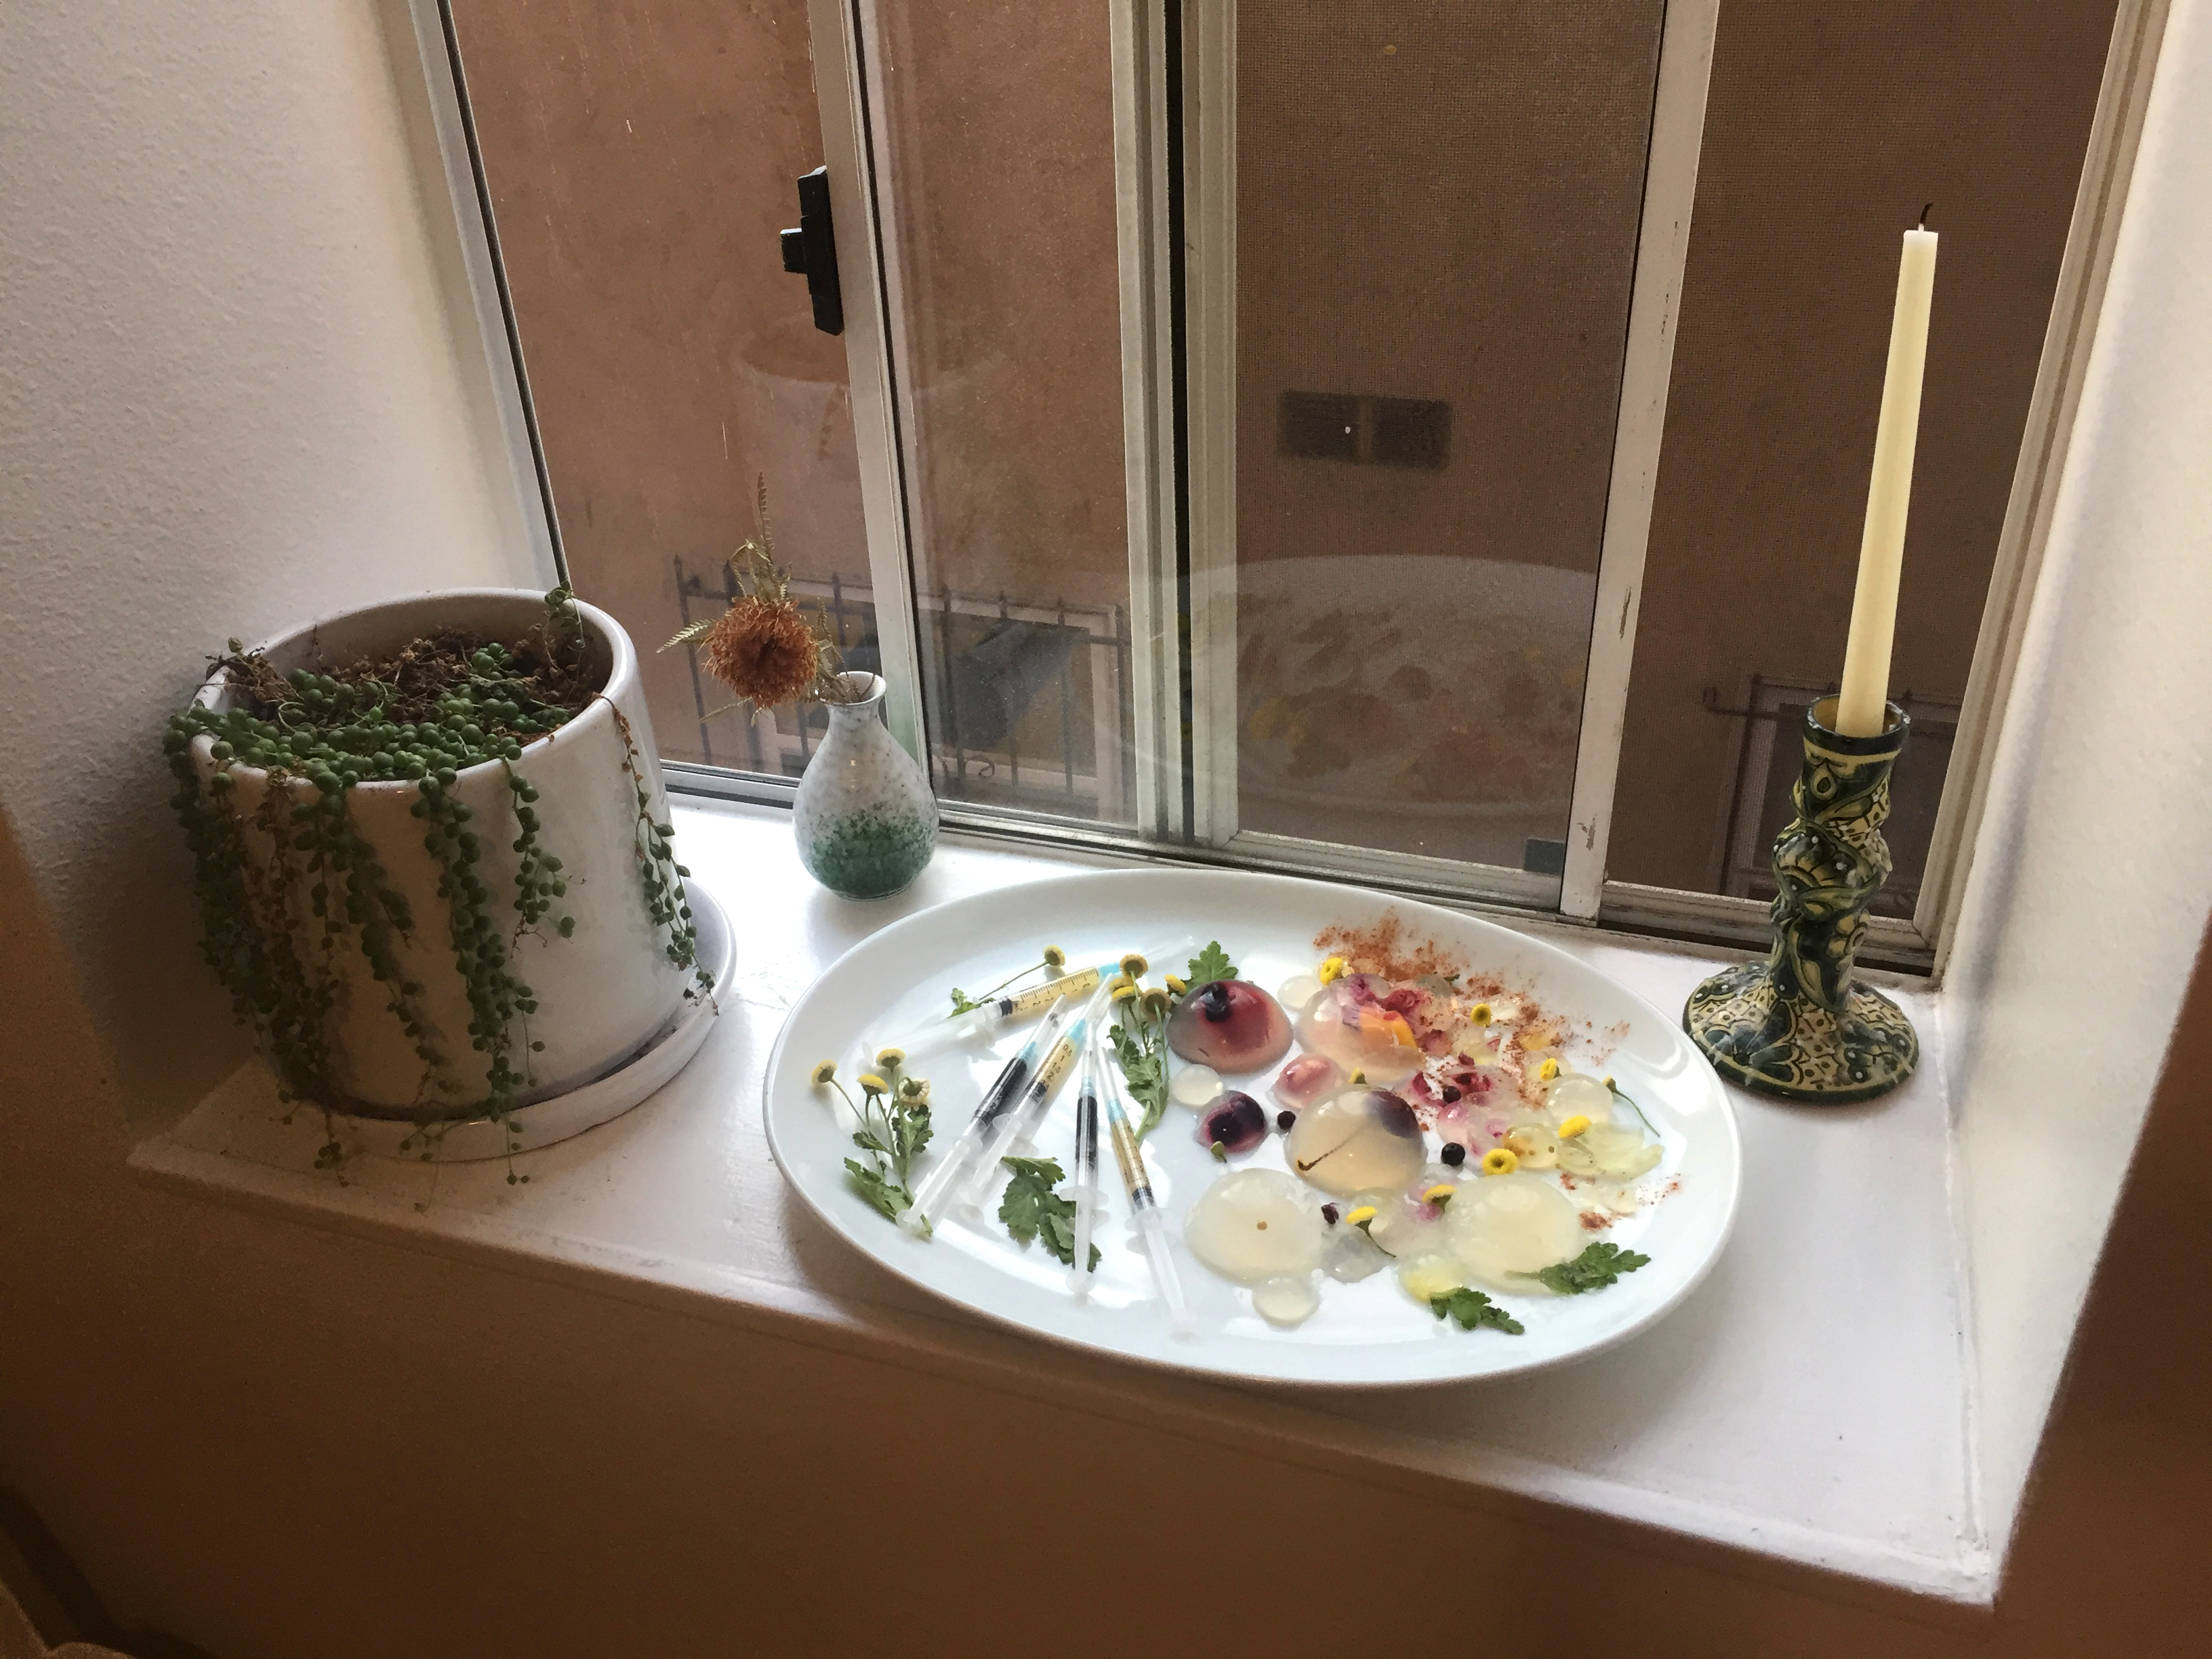 A plate of jello half-spheres and syringes on a windowsill next to a flower, planter and candle